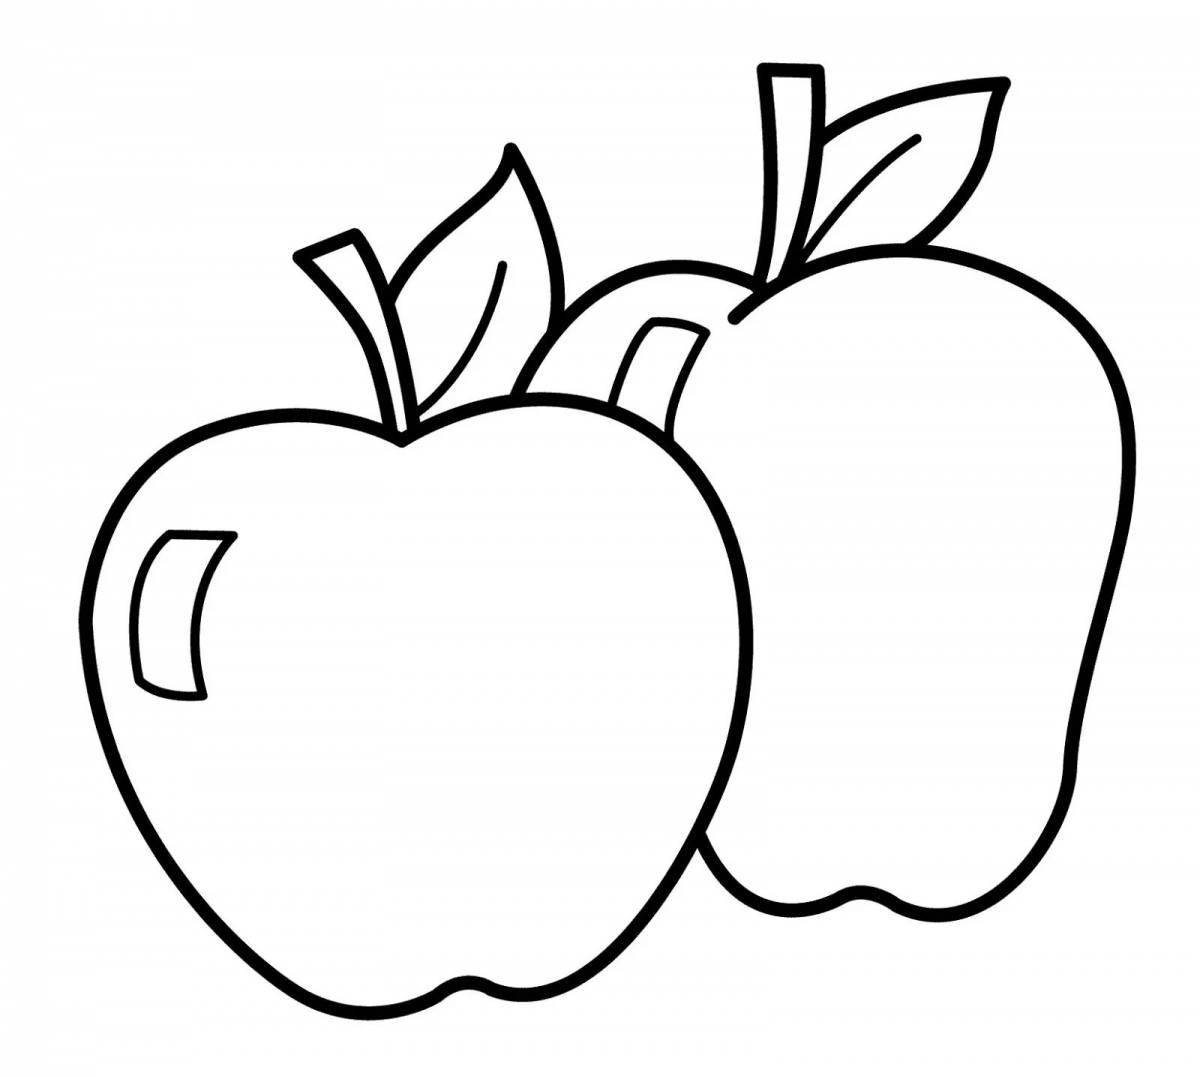 Adorable apple coloring book for kids 5-6 years old